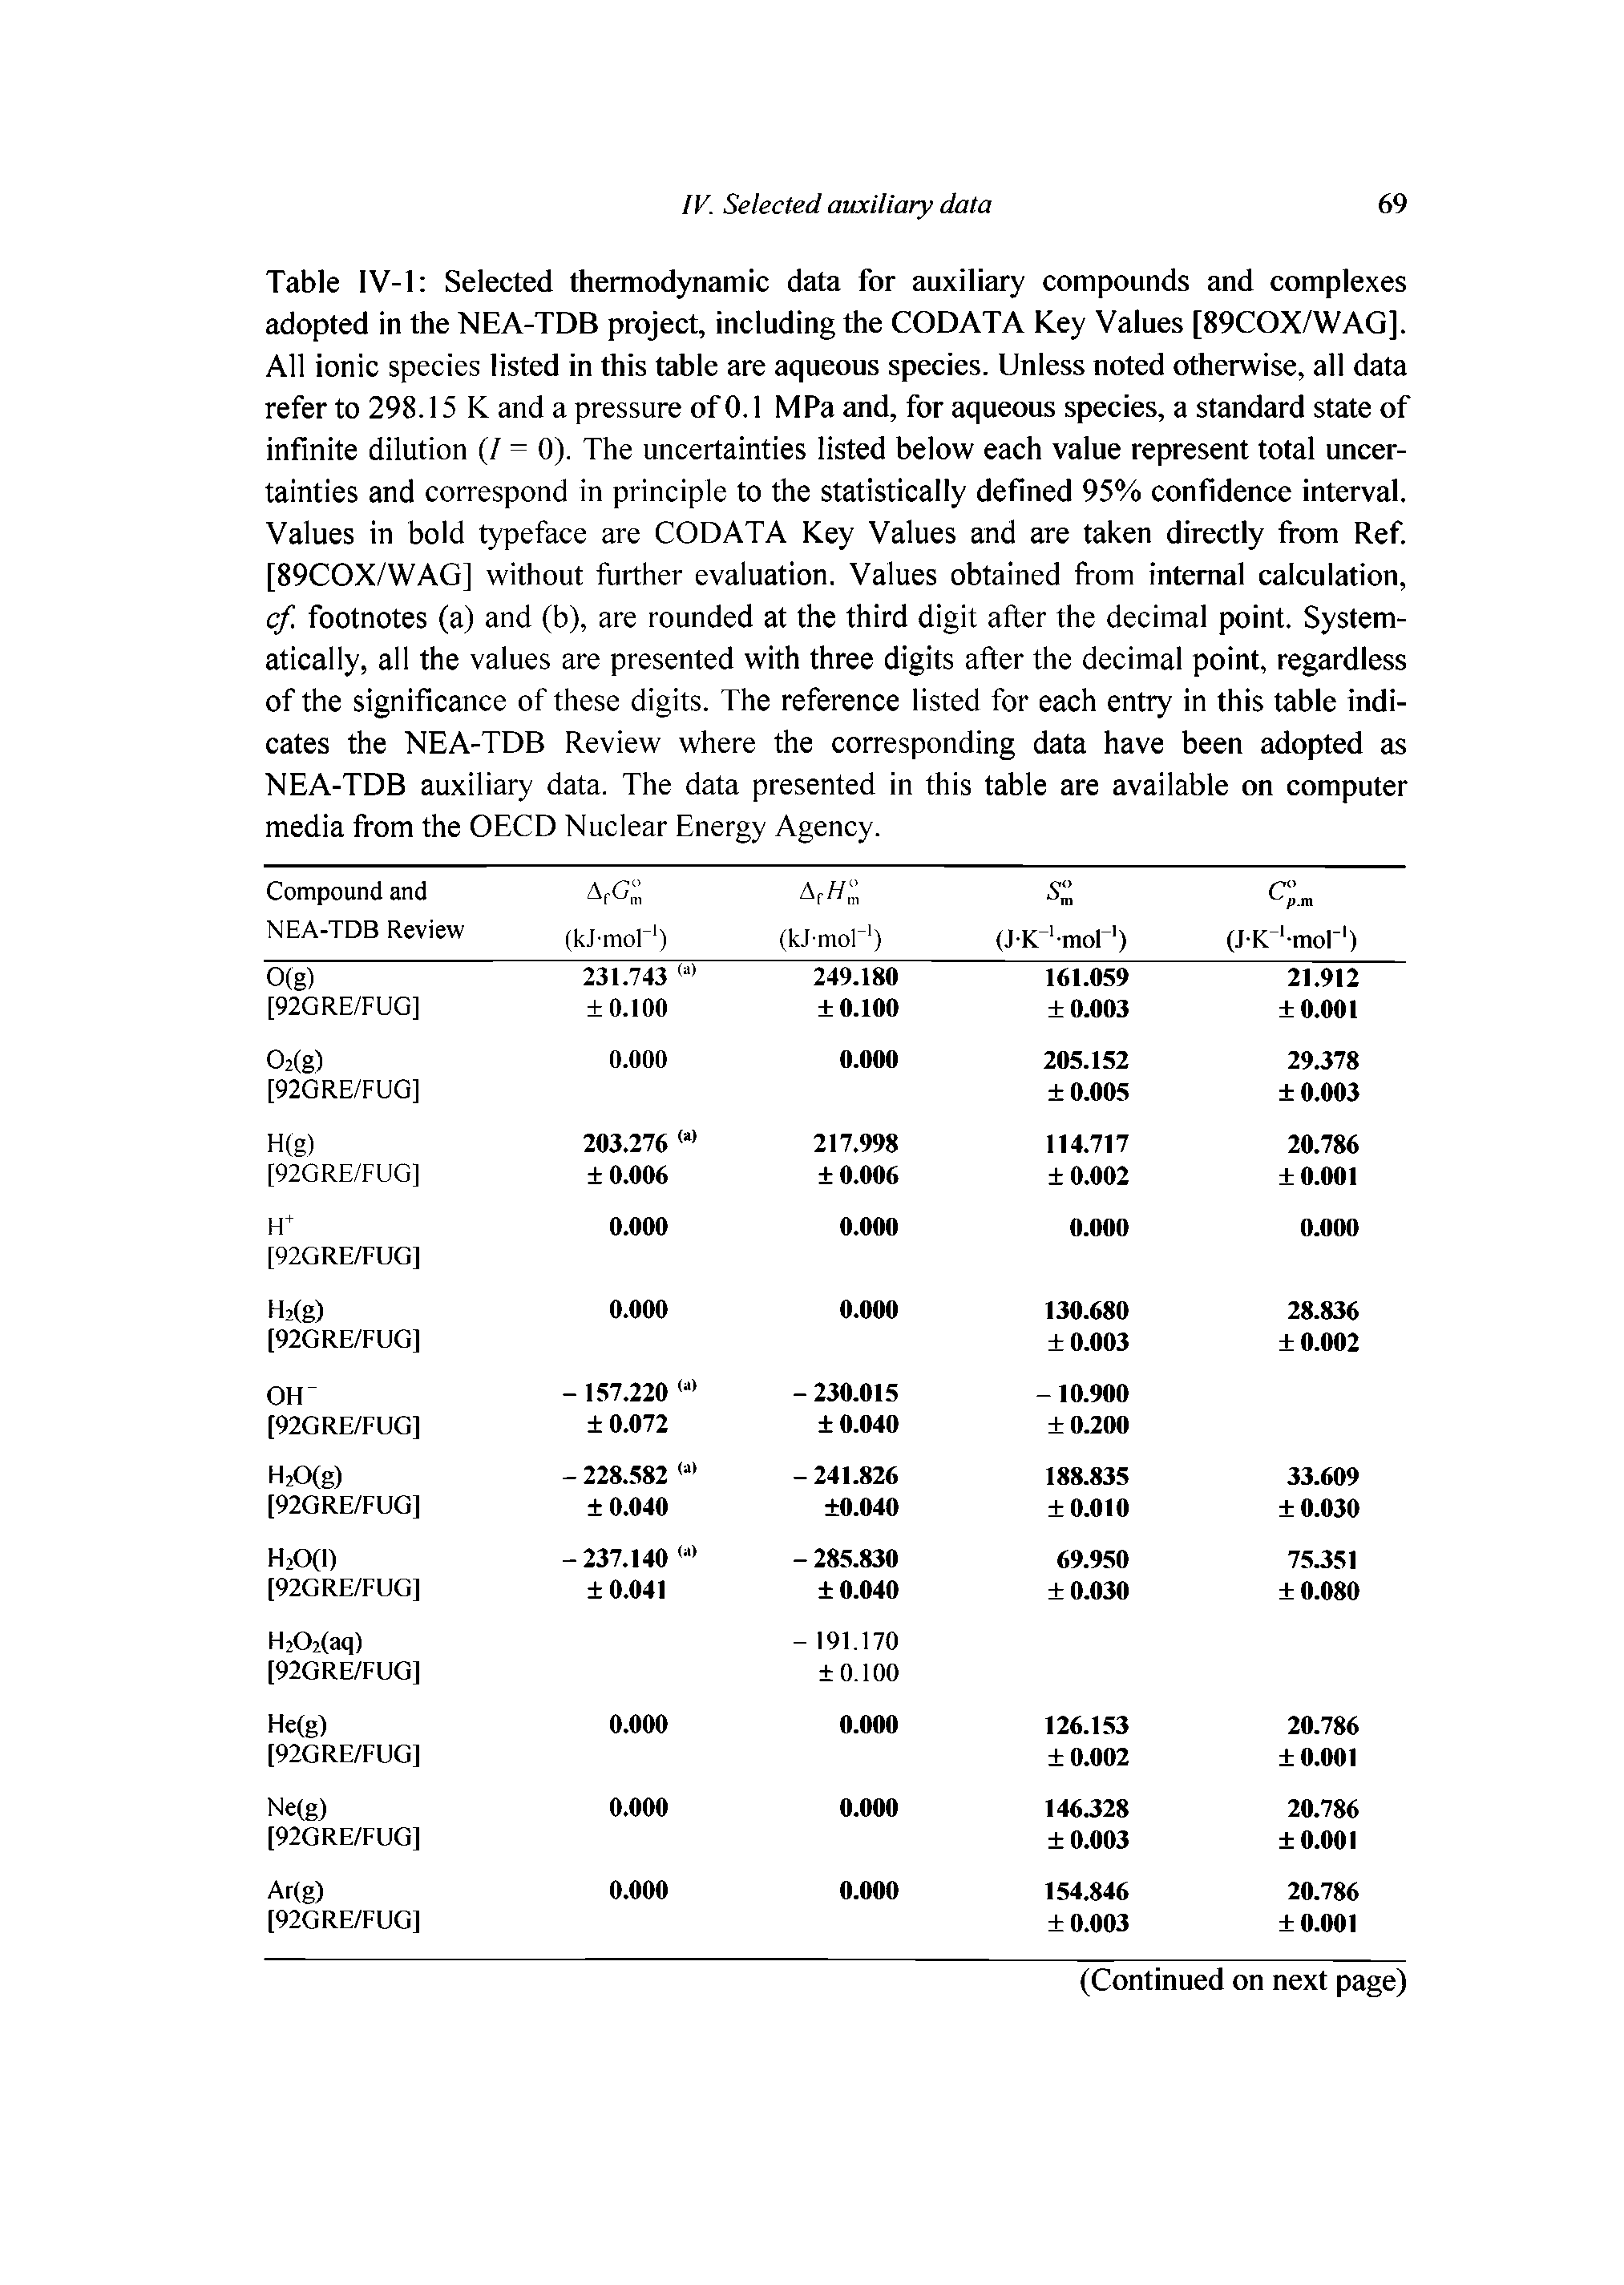 Table IV-1 Selected thermodynamic data for auxiliary compounds and complexes adopted in the NEA-TDB project, including the CODATA Key Values [89COX/WAG]. All ionic species listed in this table are aqueous species. Unless noted otherwise, all data refer to 298.15 K and a pressure of 0.1 MPa and, for aqueous species, a standard state of infinite dilution (/ = 0). The uncertainties listed below each value represent total uncertainties and correspond in principle to the statistically defined 95% confidence interval. Values in bold typeface are CODATA Key Values and are taken directly from Ref [89COX/WAG] without further evaluation. Values obtained from internal calculation, cf. footnotes (a) and (b), are rounded at the third digit after the decimal point. Systematically, all the values are presented with three digits after the decimal point, regardless of the significance of these digits. The reference listed for each entry in this table indicates the NEA-TDB Review where the corresponding data have been adopted as NEA-TDB auxiliary data. The data presented in this table are available on computer media from the OECD Nuclear Energy Agency.